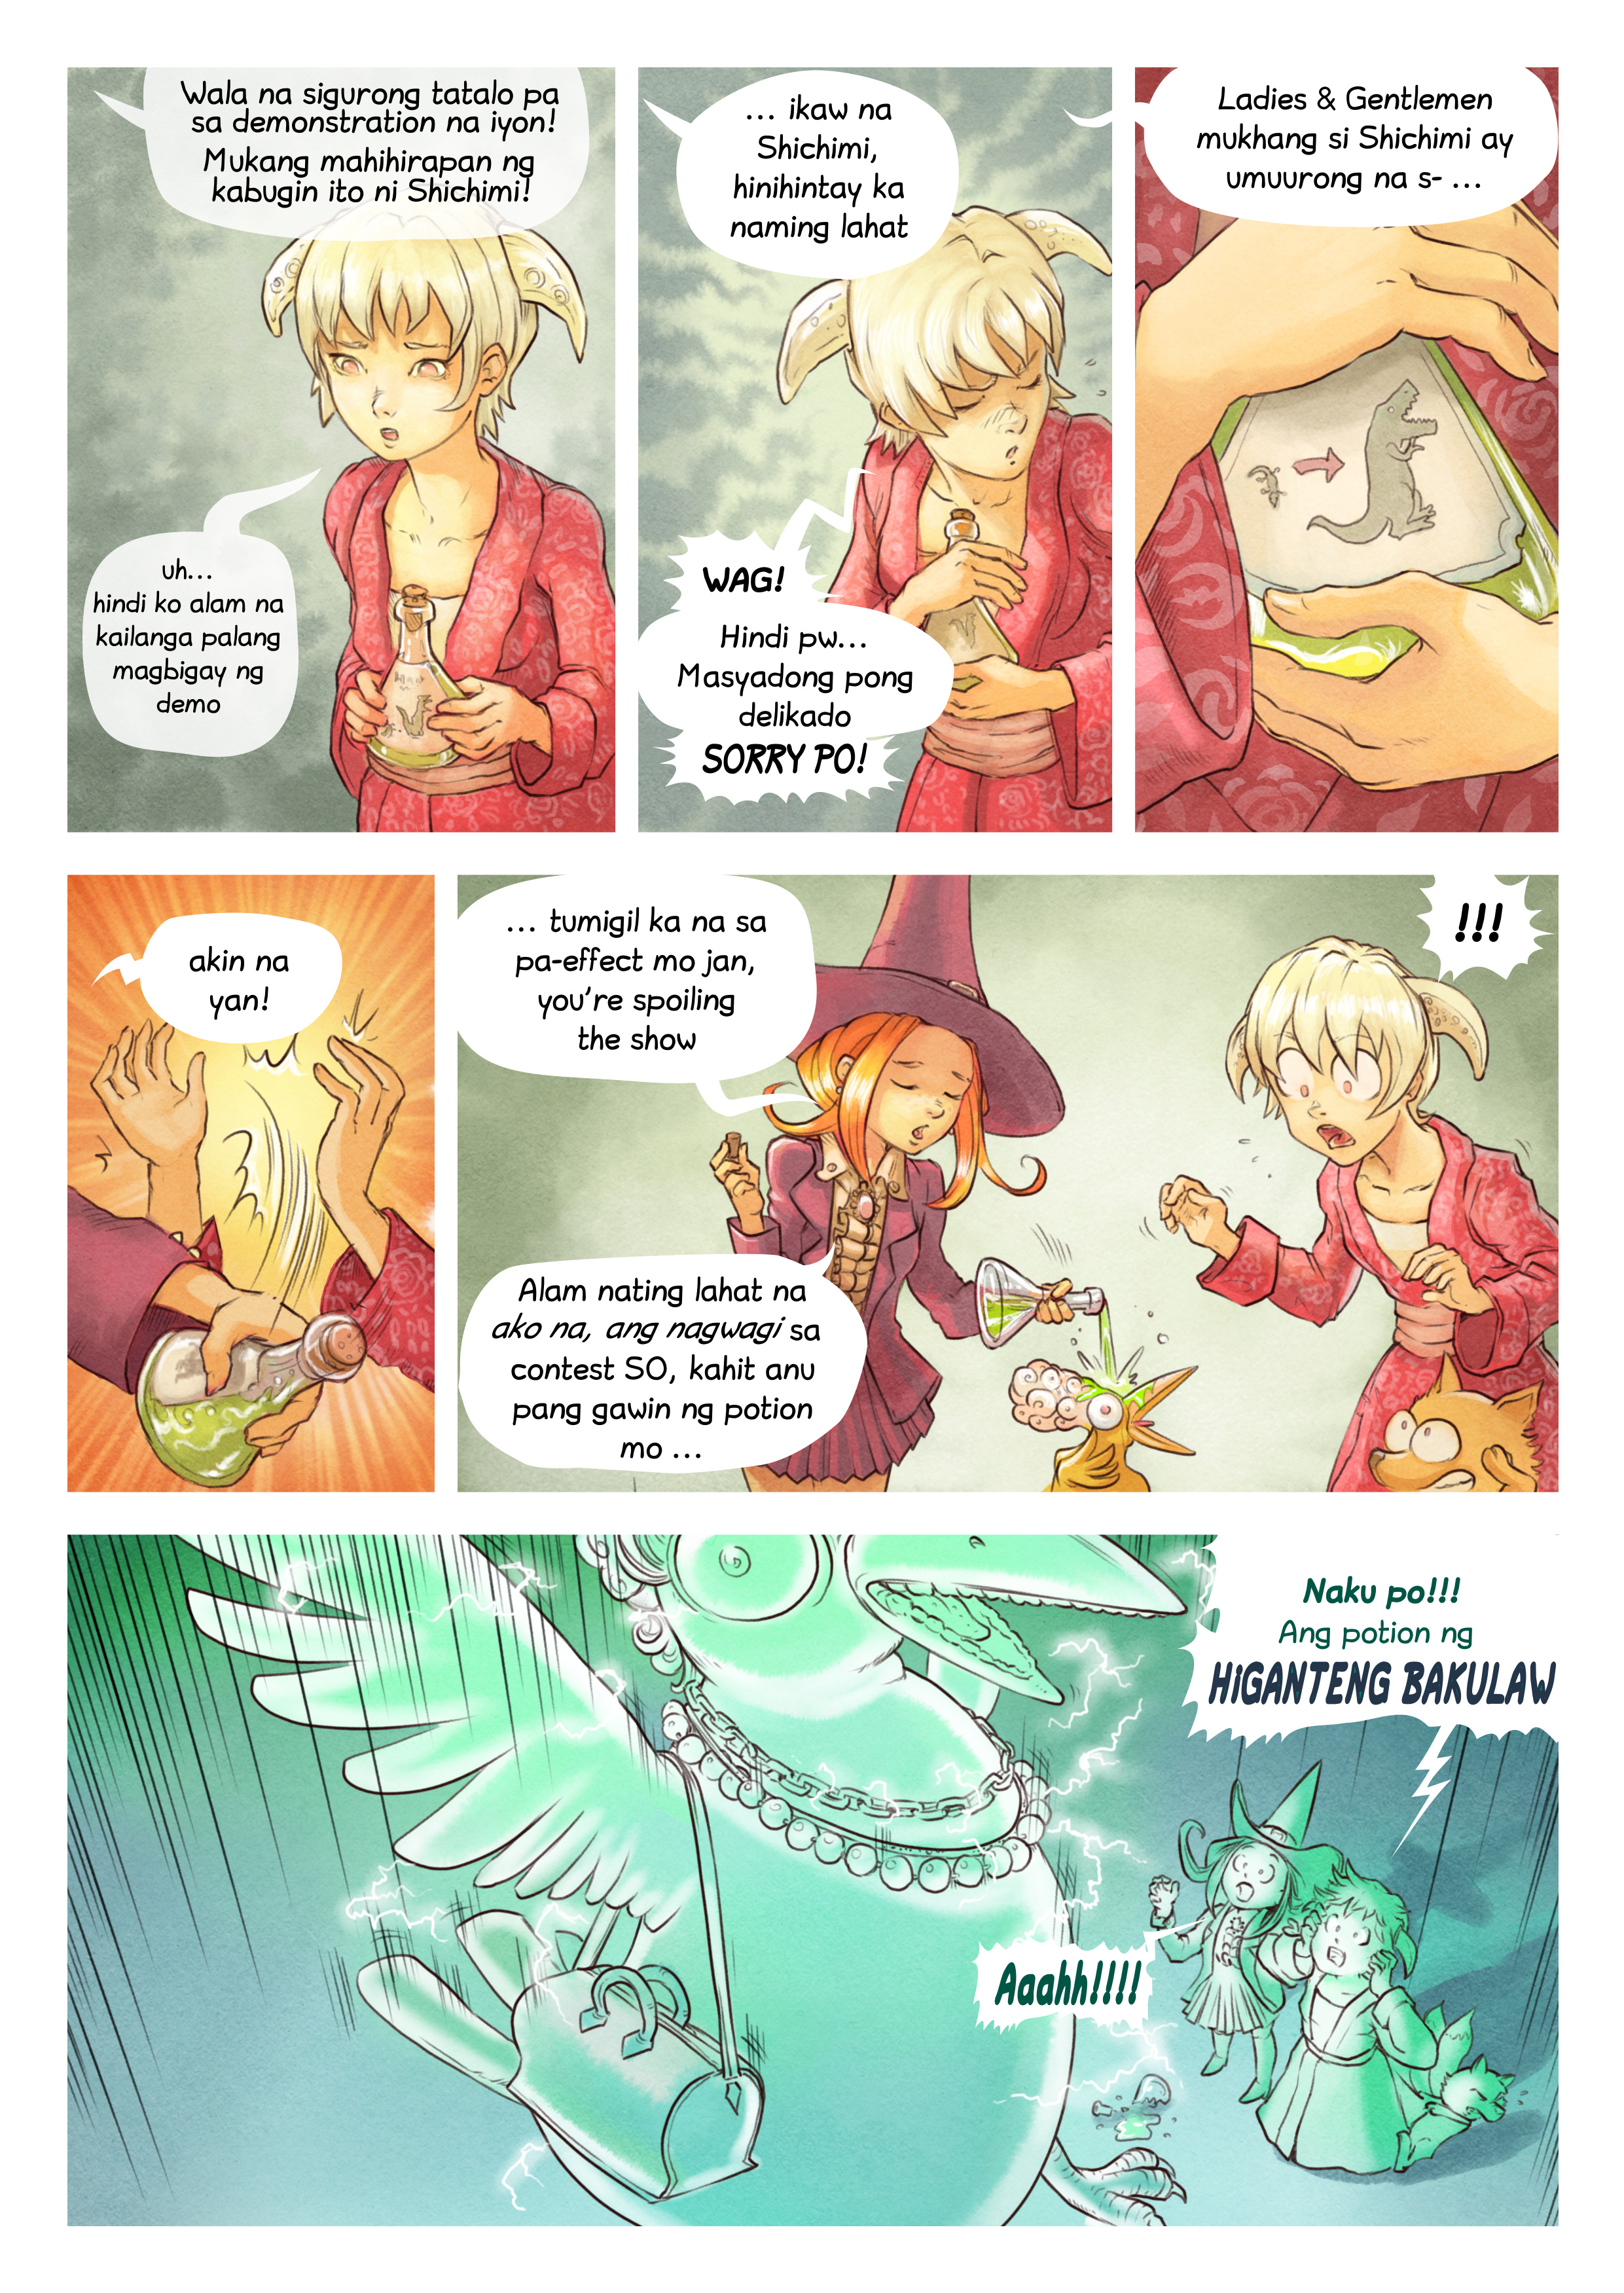 Episode 6: Ang Potions Contest, Page 6